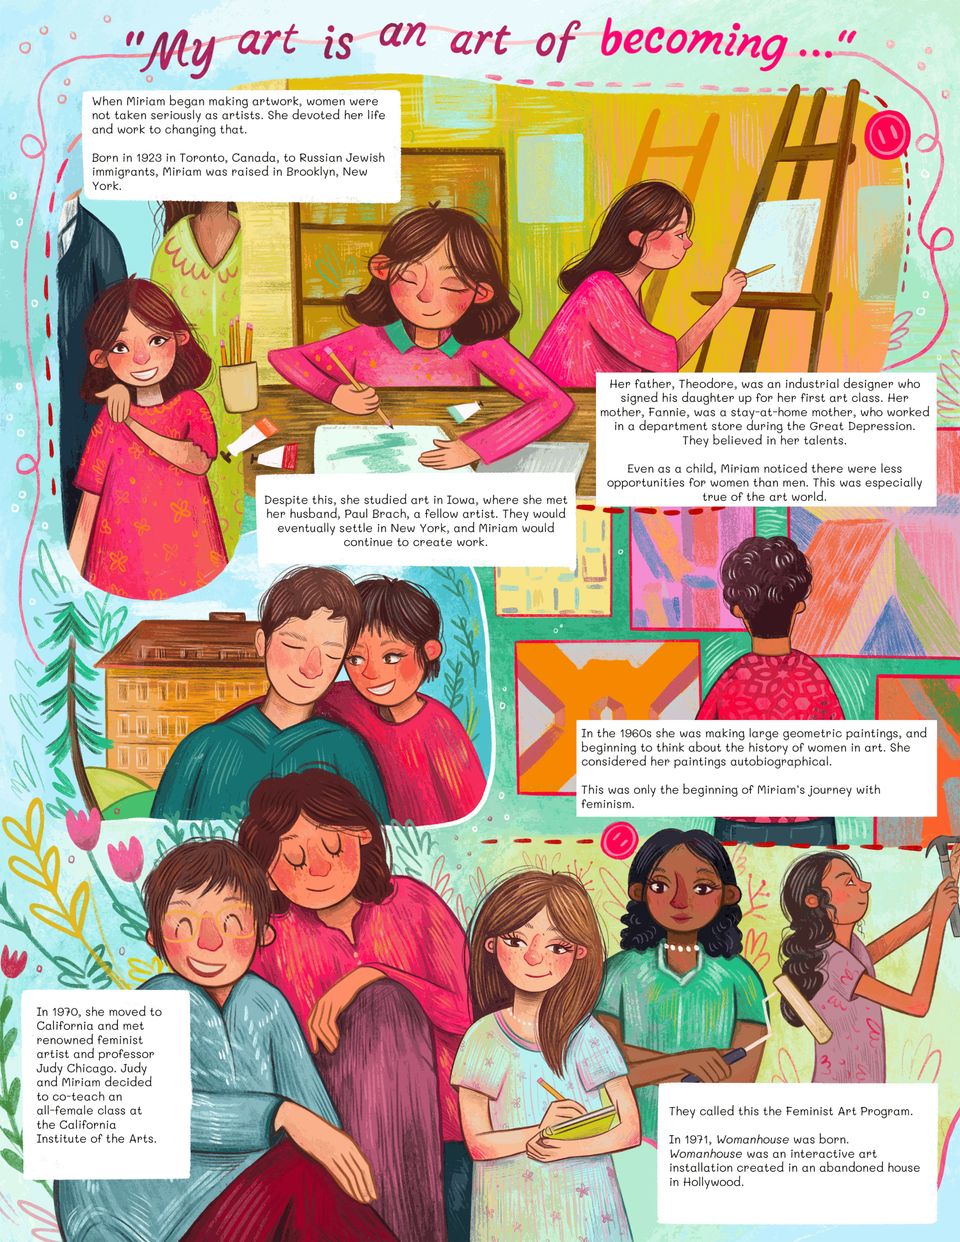 Multi-panel illustration with written description of Miriam's art career: drawing as a child, meeting her husband in college, and founding the Feminist Art Program with Judy Chicago.